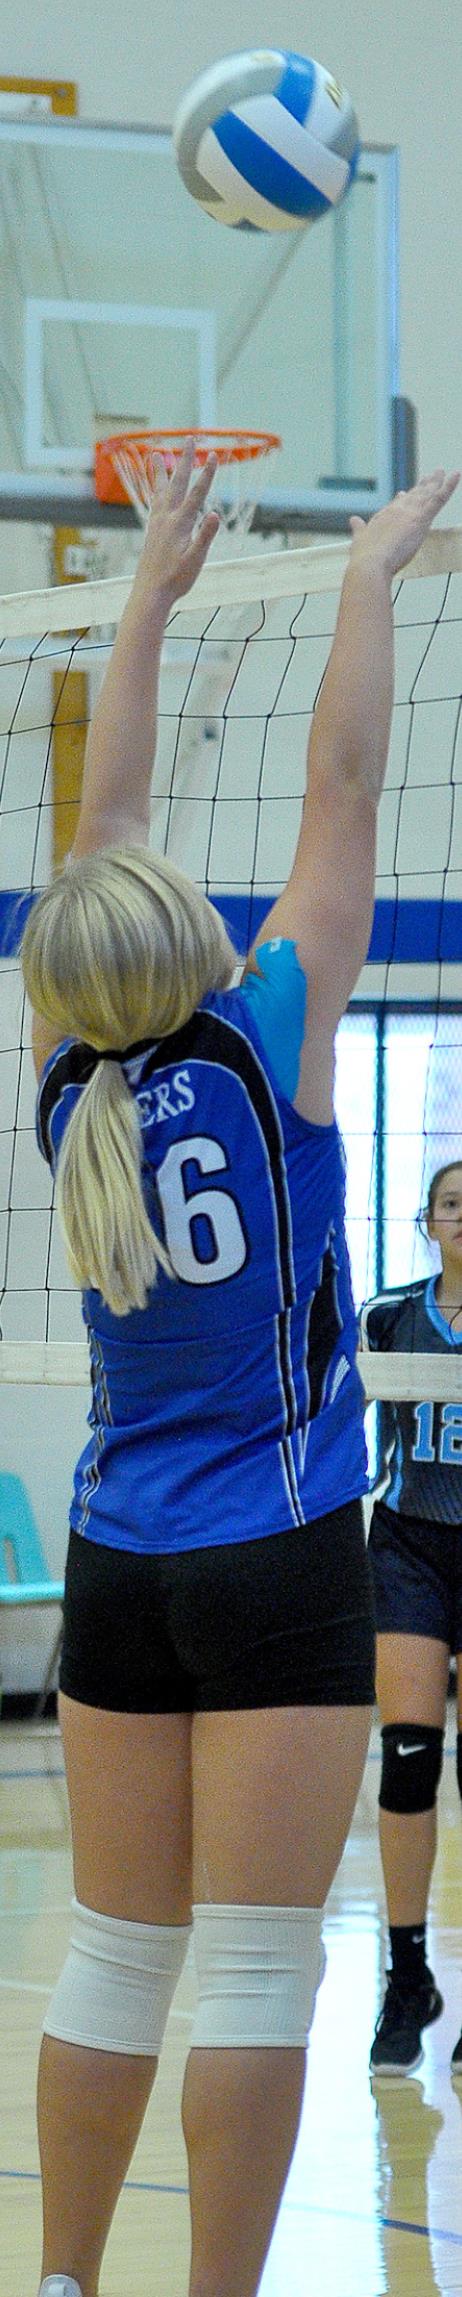 KARLEIGH HORN goes up for a block in the Lady Tigers’ game against Lucas/Sylvan on September 23.